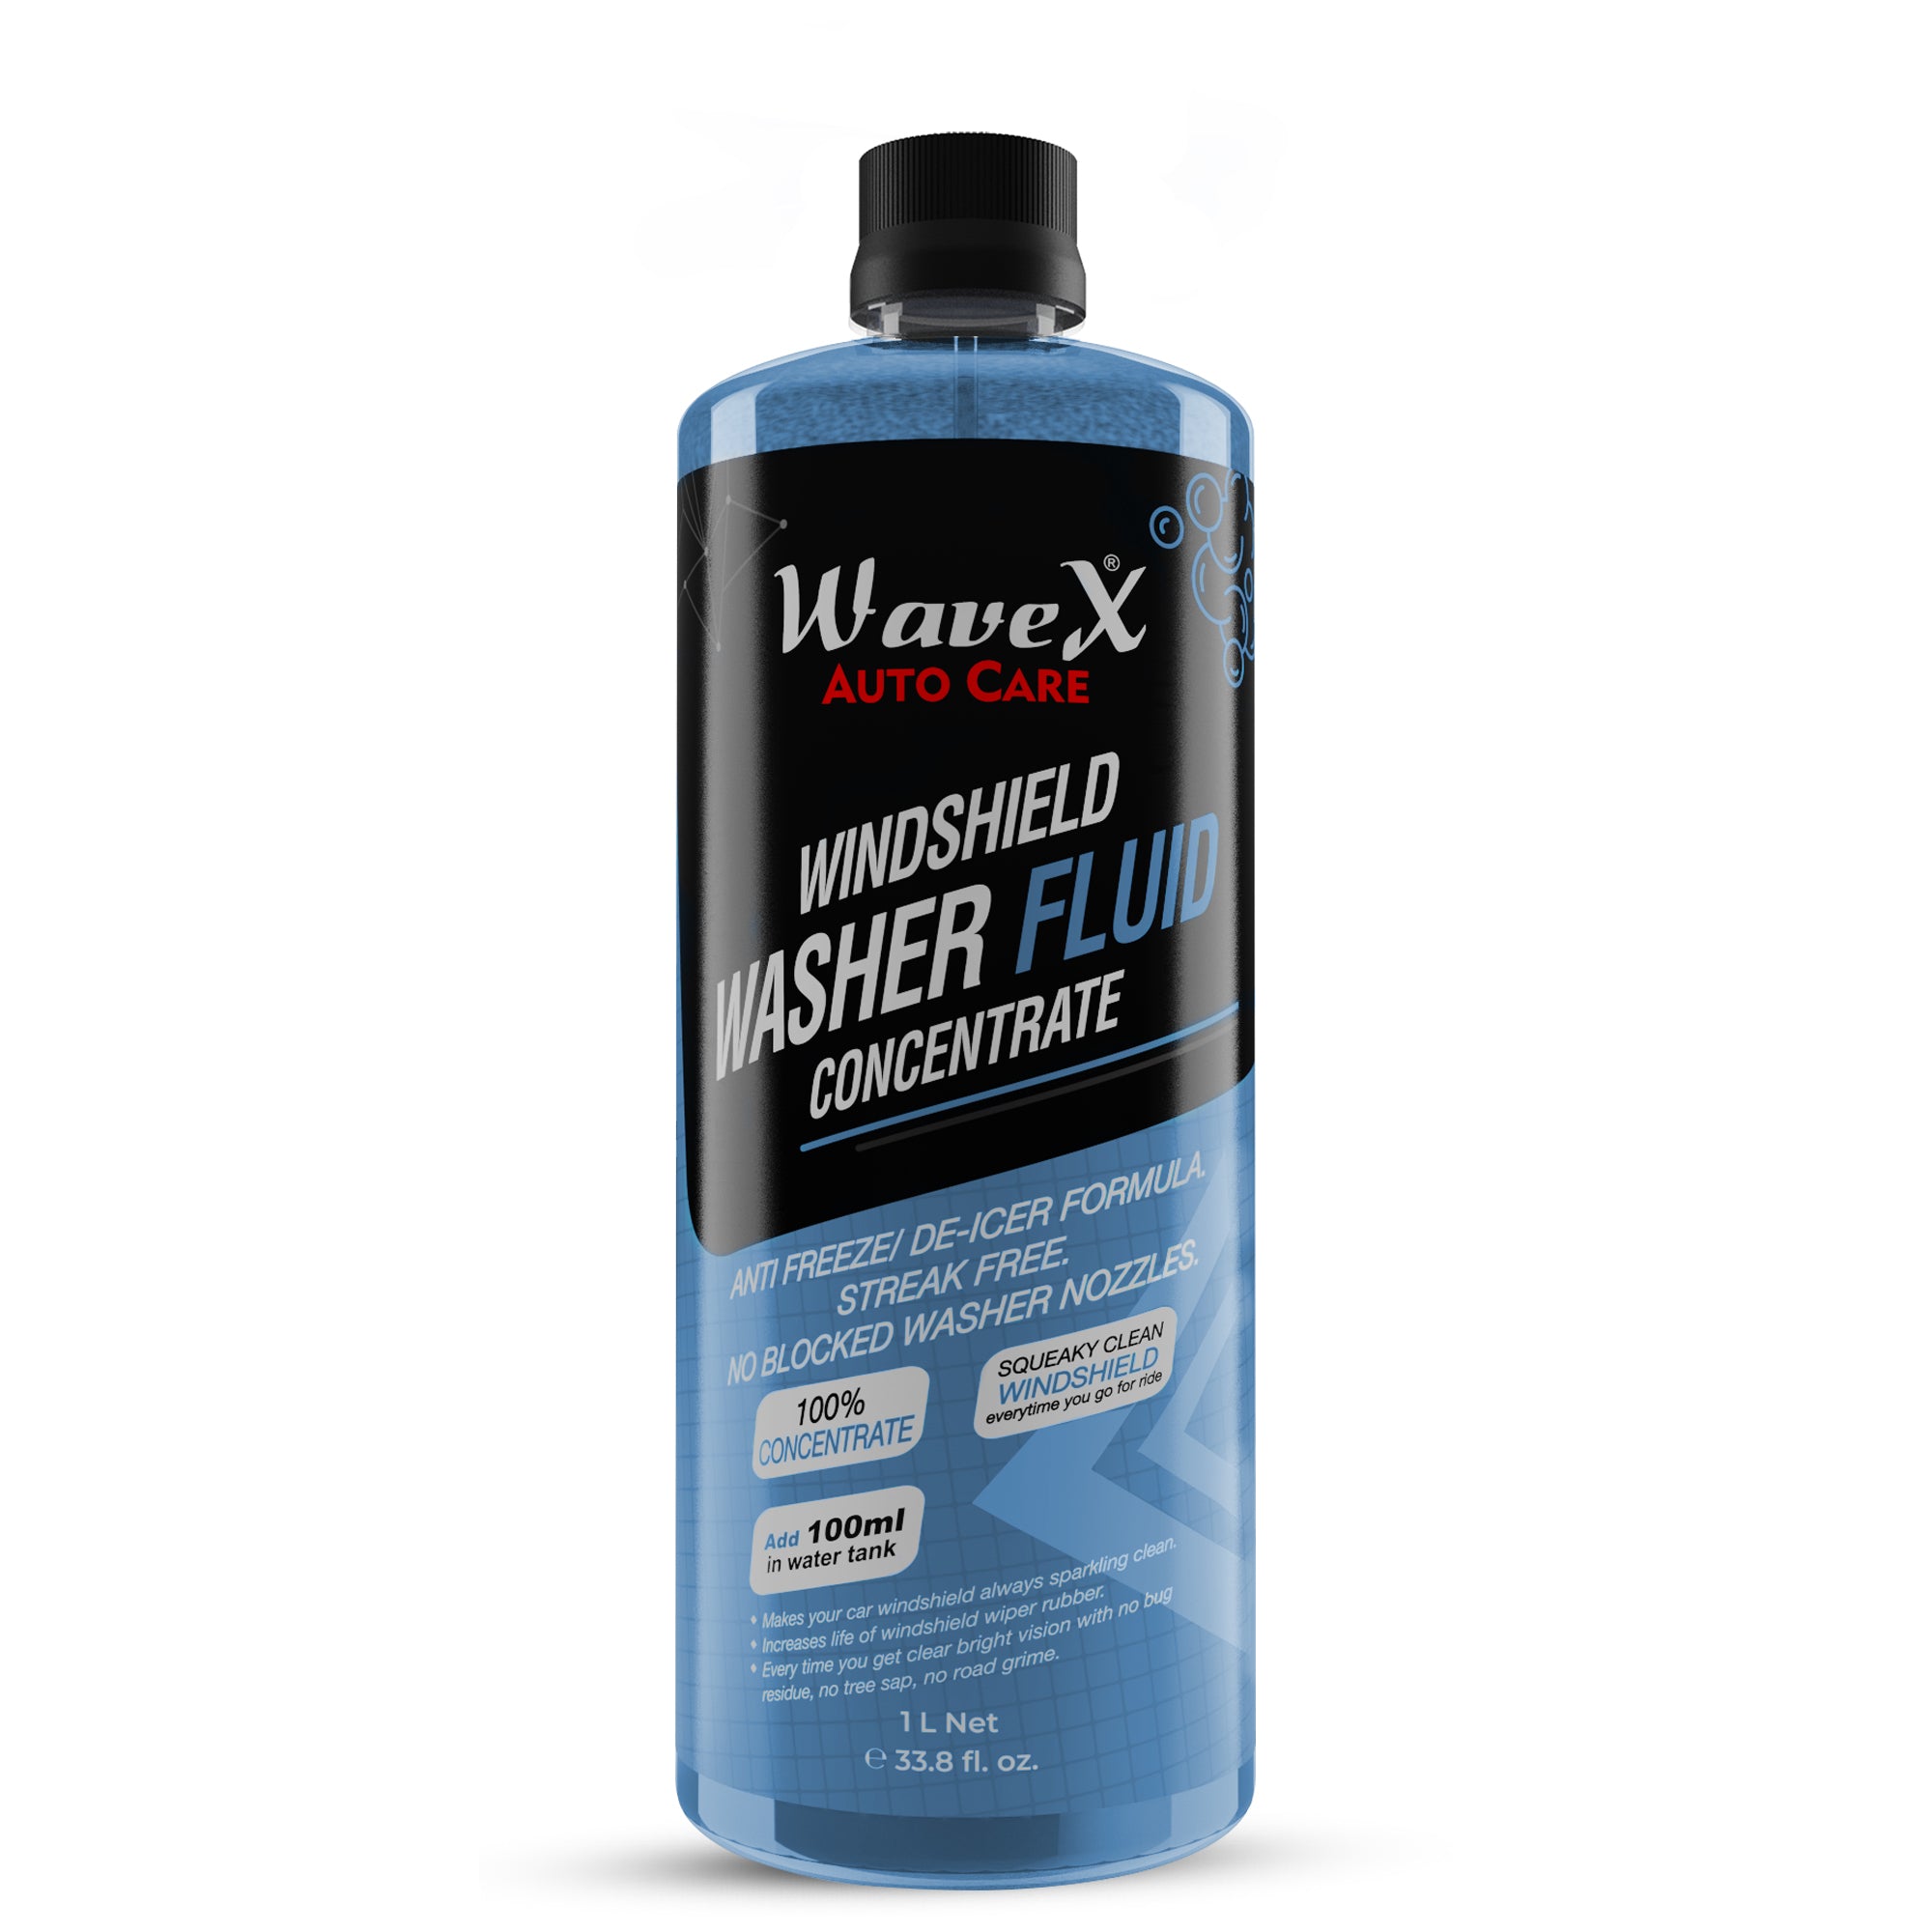 Windscreen Washer Additive  Rain-X Protection for Every Spray